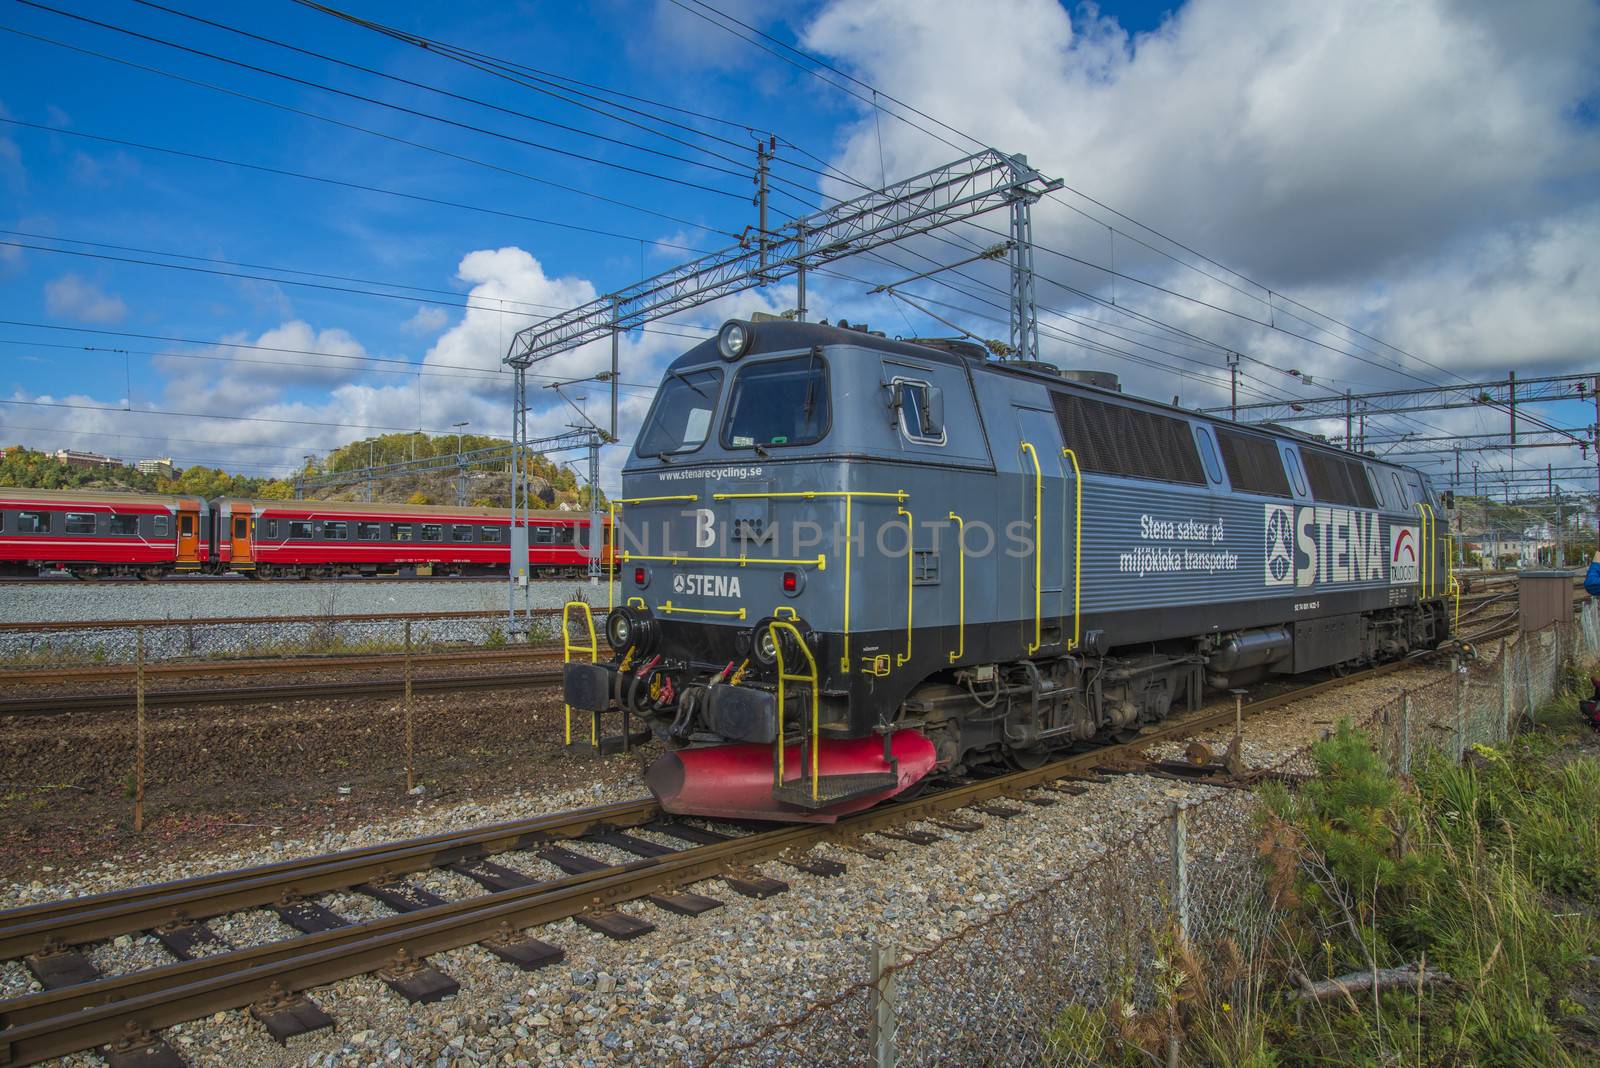 Image is shot in the first of October 2013 at Halden, Norway railroad station